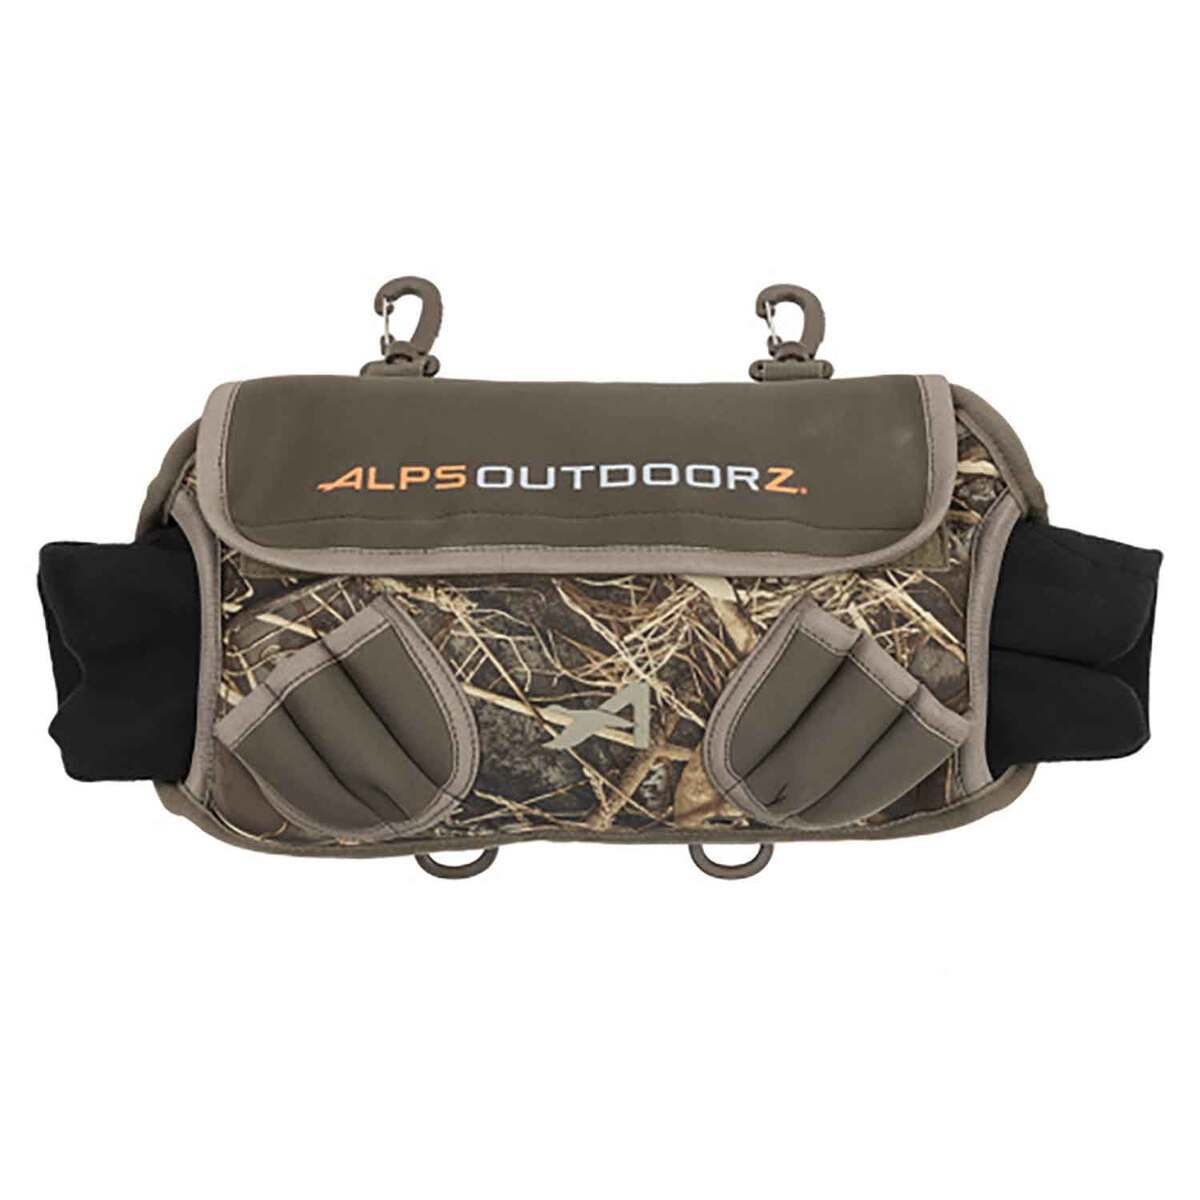 ALPS Outdoorz Deluxe Hand Warmer - Realtree MAX-7 | Sportsman's Warehouse